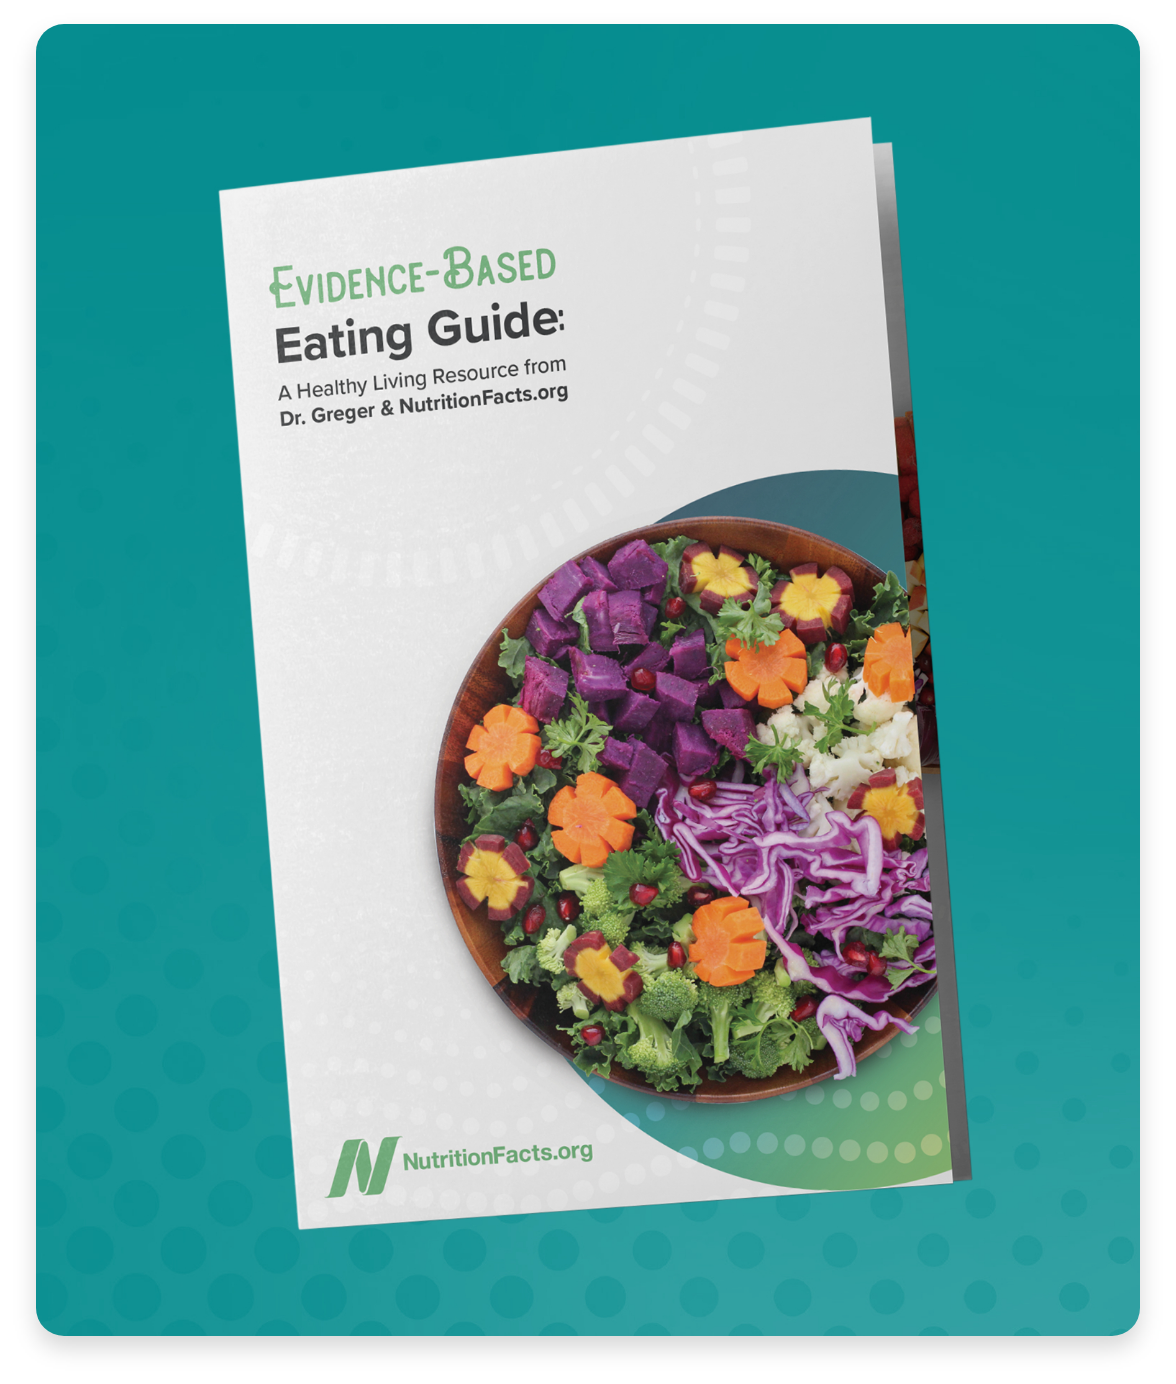 Picture of the Evidence-Based Eating Guide